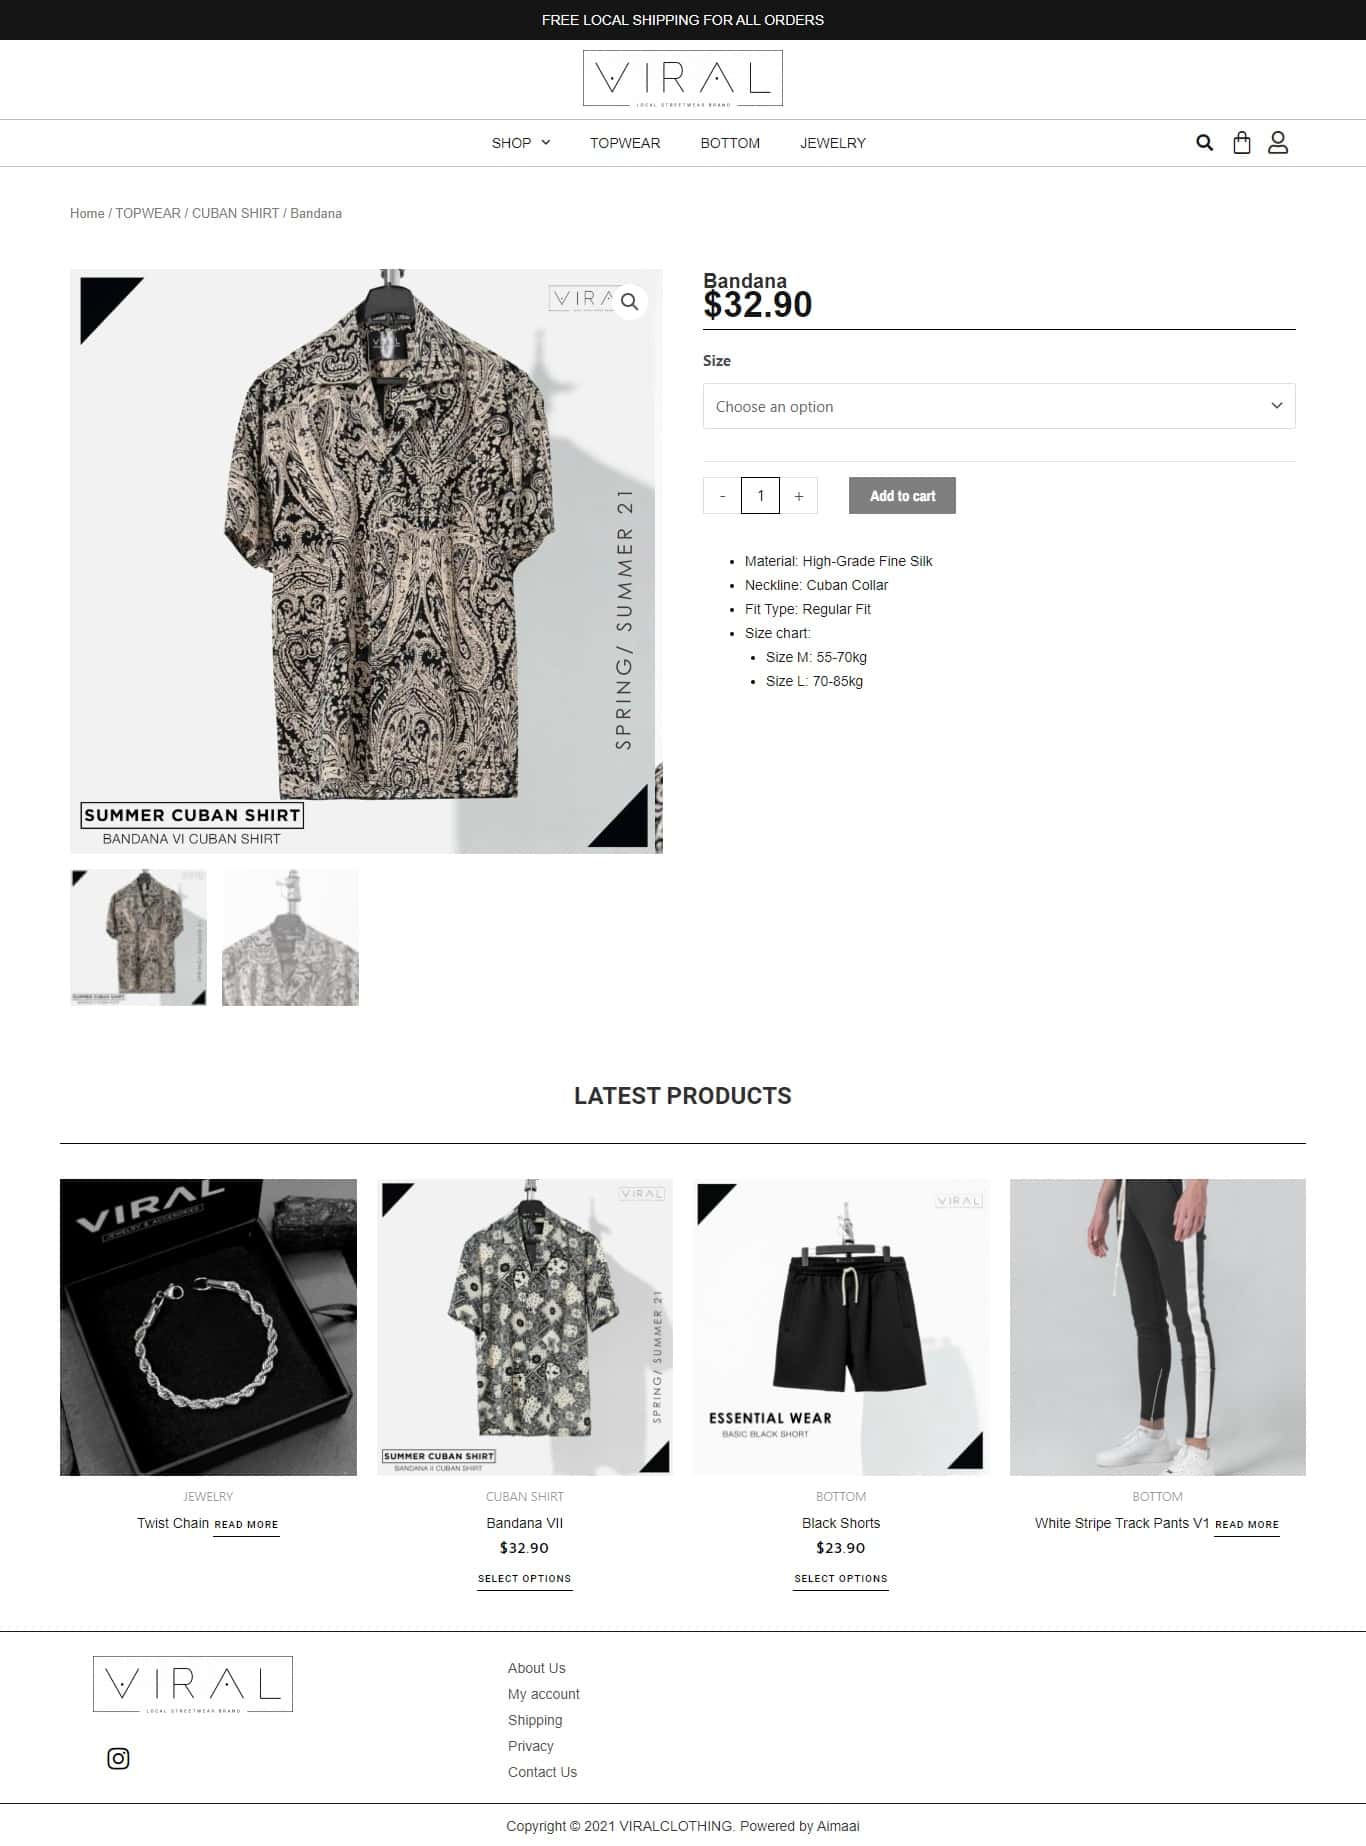 A fashion website design for a clothing store using template-based web development.